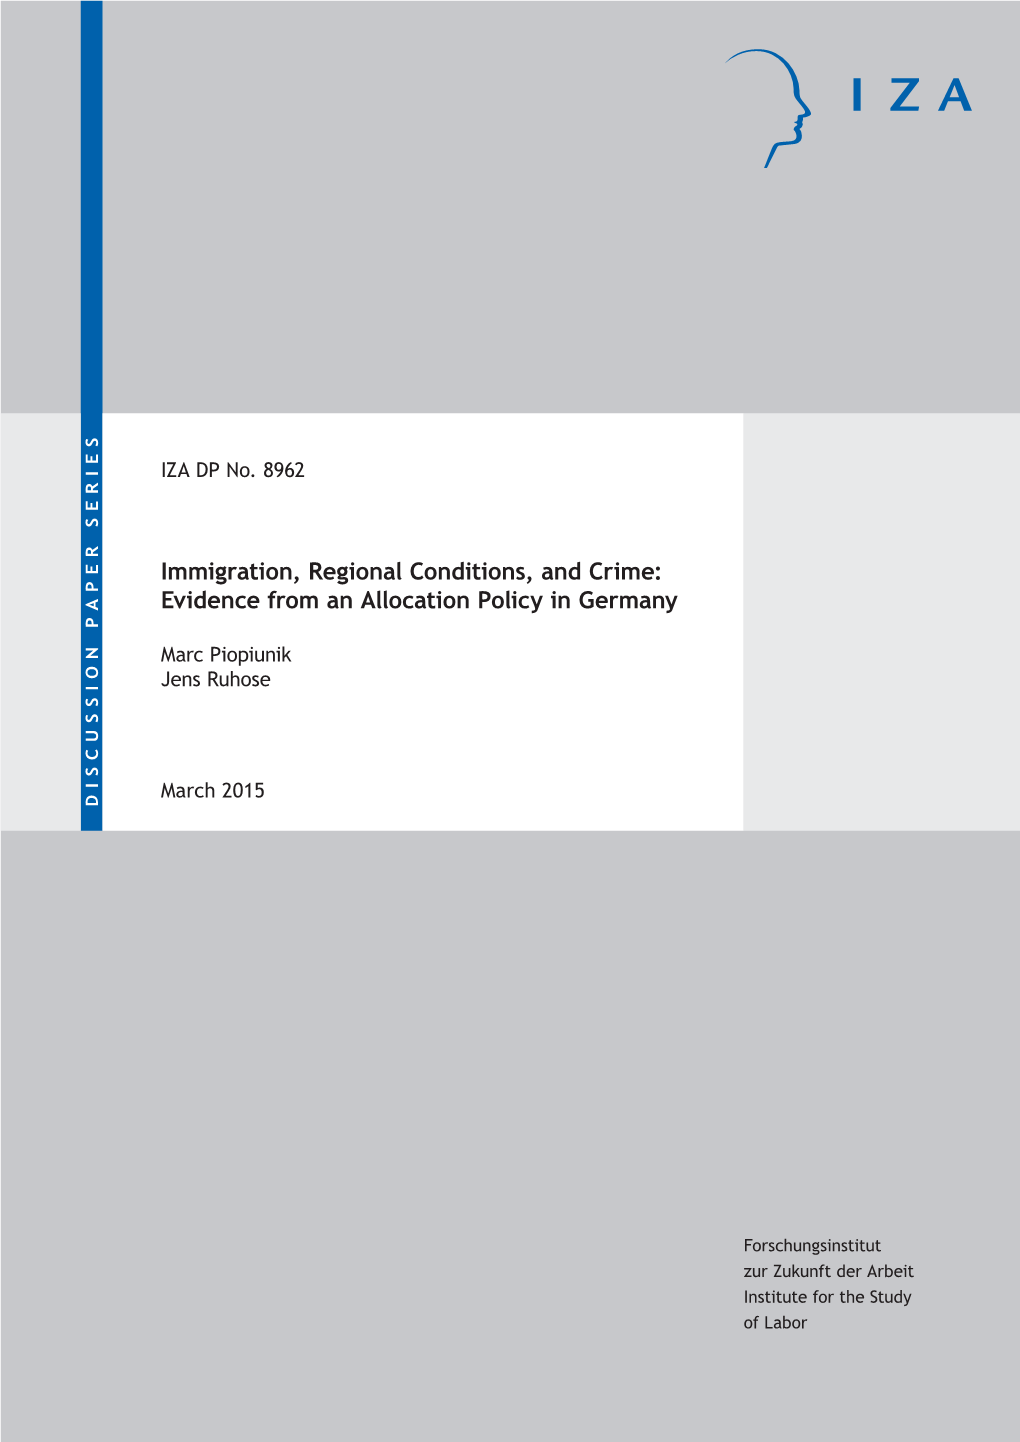 Immigration, Regional Conditions, and Crime: Evidence from an Allocation Policy in Germany